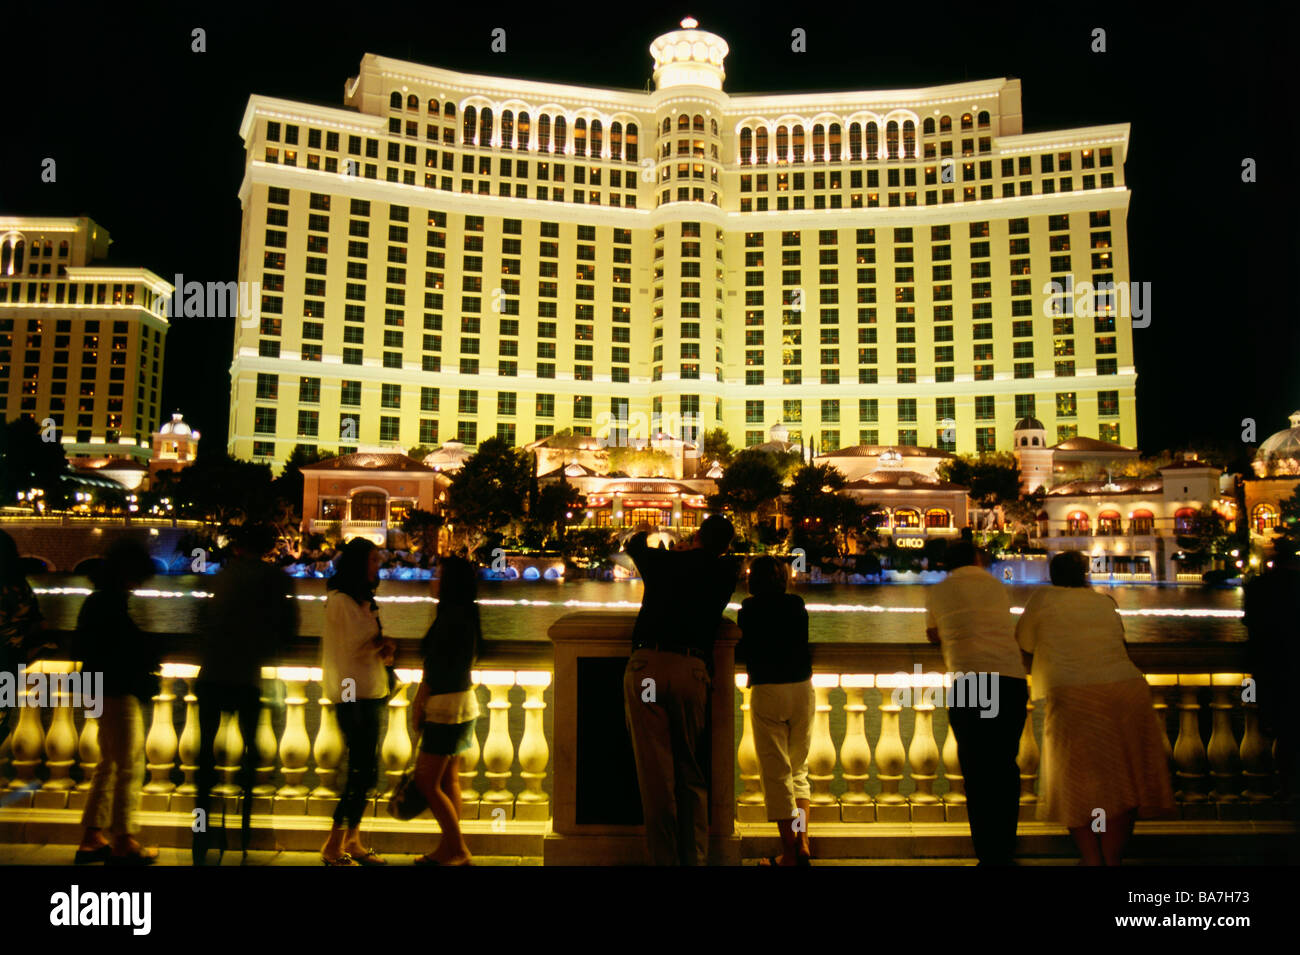 Viewers at night at fountain in front of Hotel Bellagio, Las Vegas, Nevada, USA, America Stock Photo